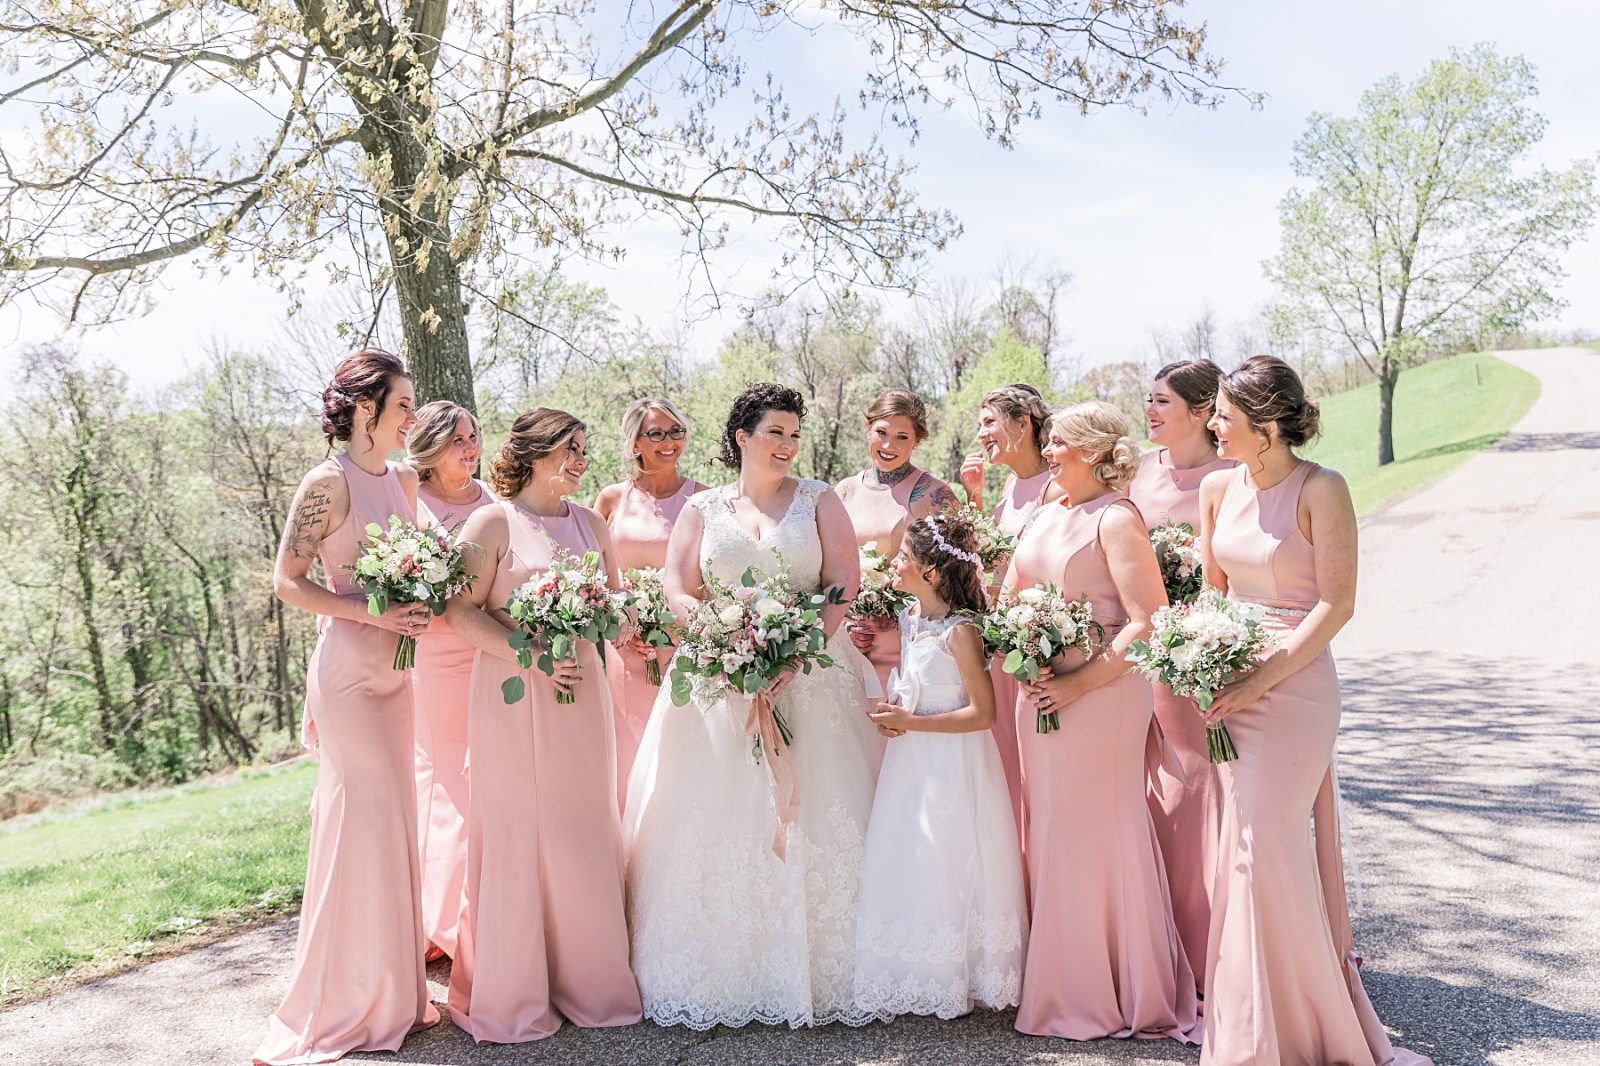 Wedding photography by Diana Gramlich, Bride with bridesmaids in blush Allure dresses looking at each other and smiling